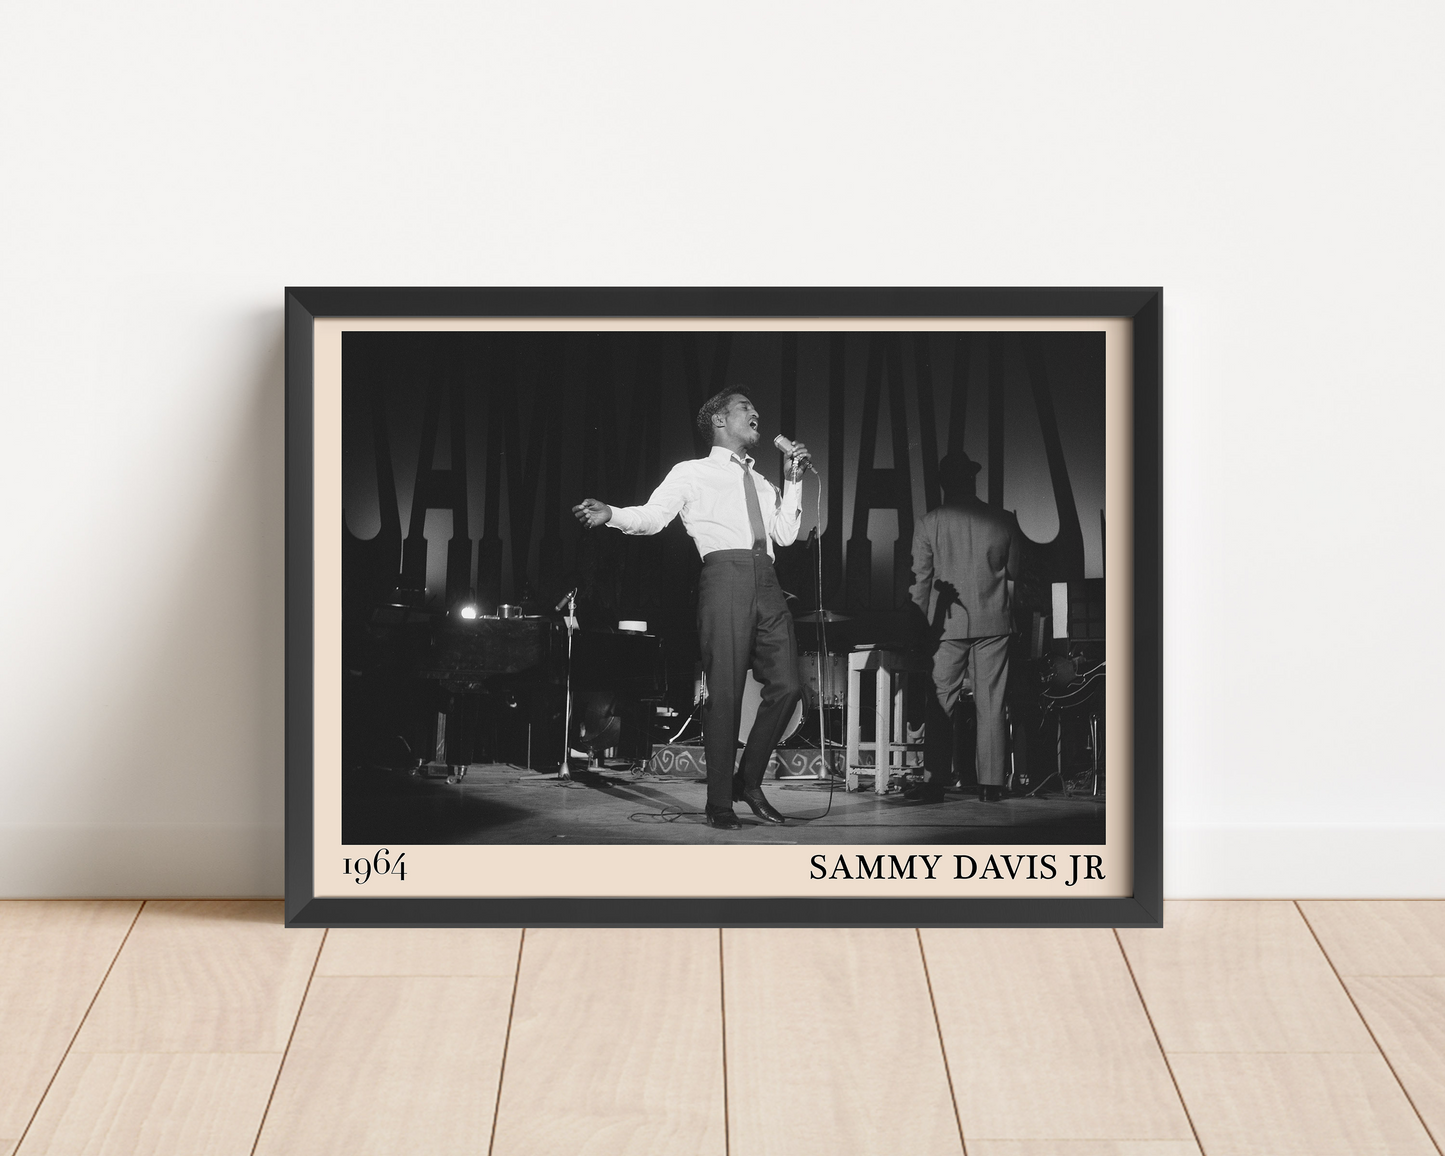 1964 picture of Sammy Davis Jr. Picture crafted into a black framed poster, with an off-white border. Poster is propped against a white wall